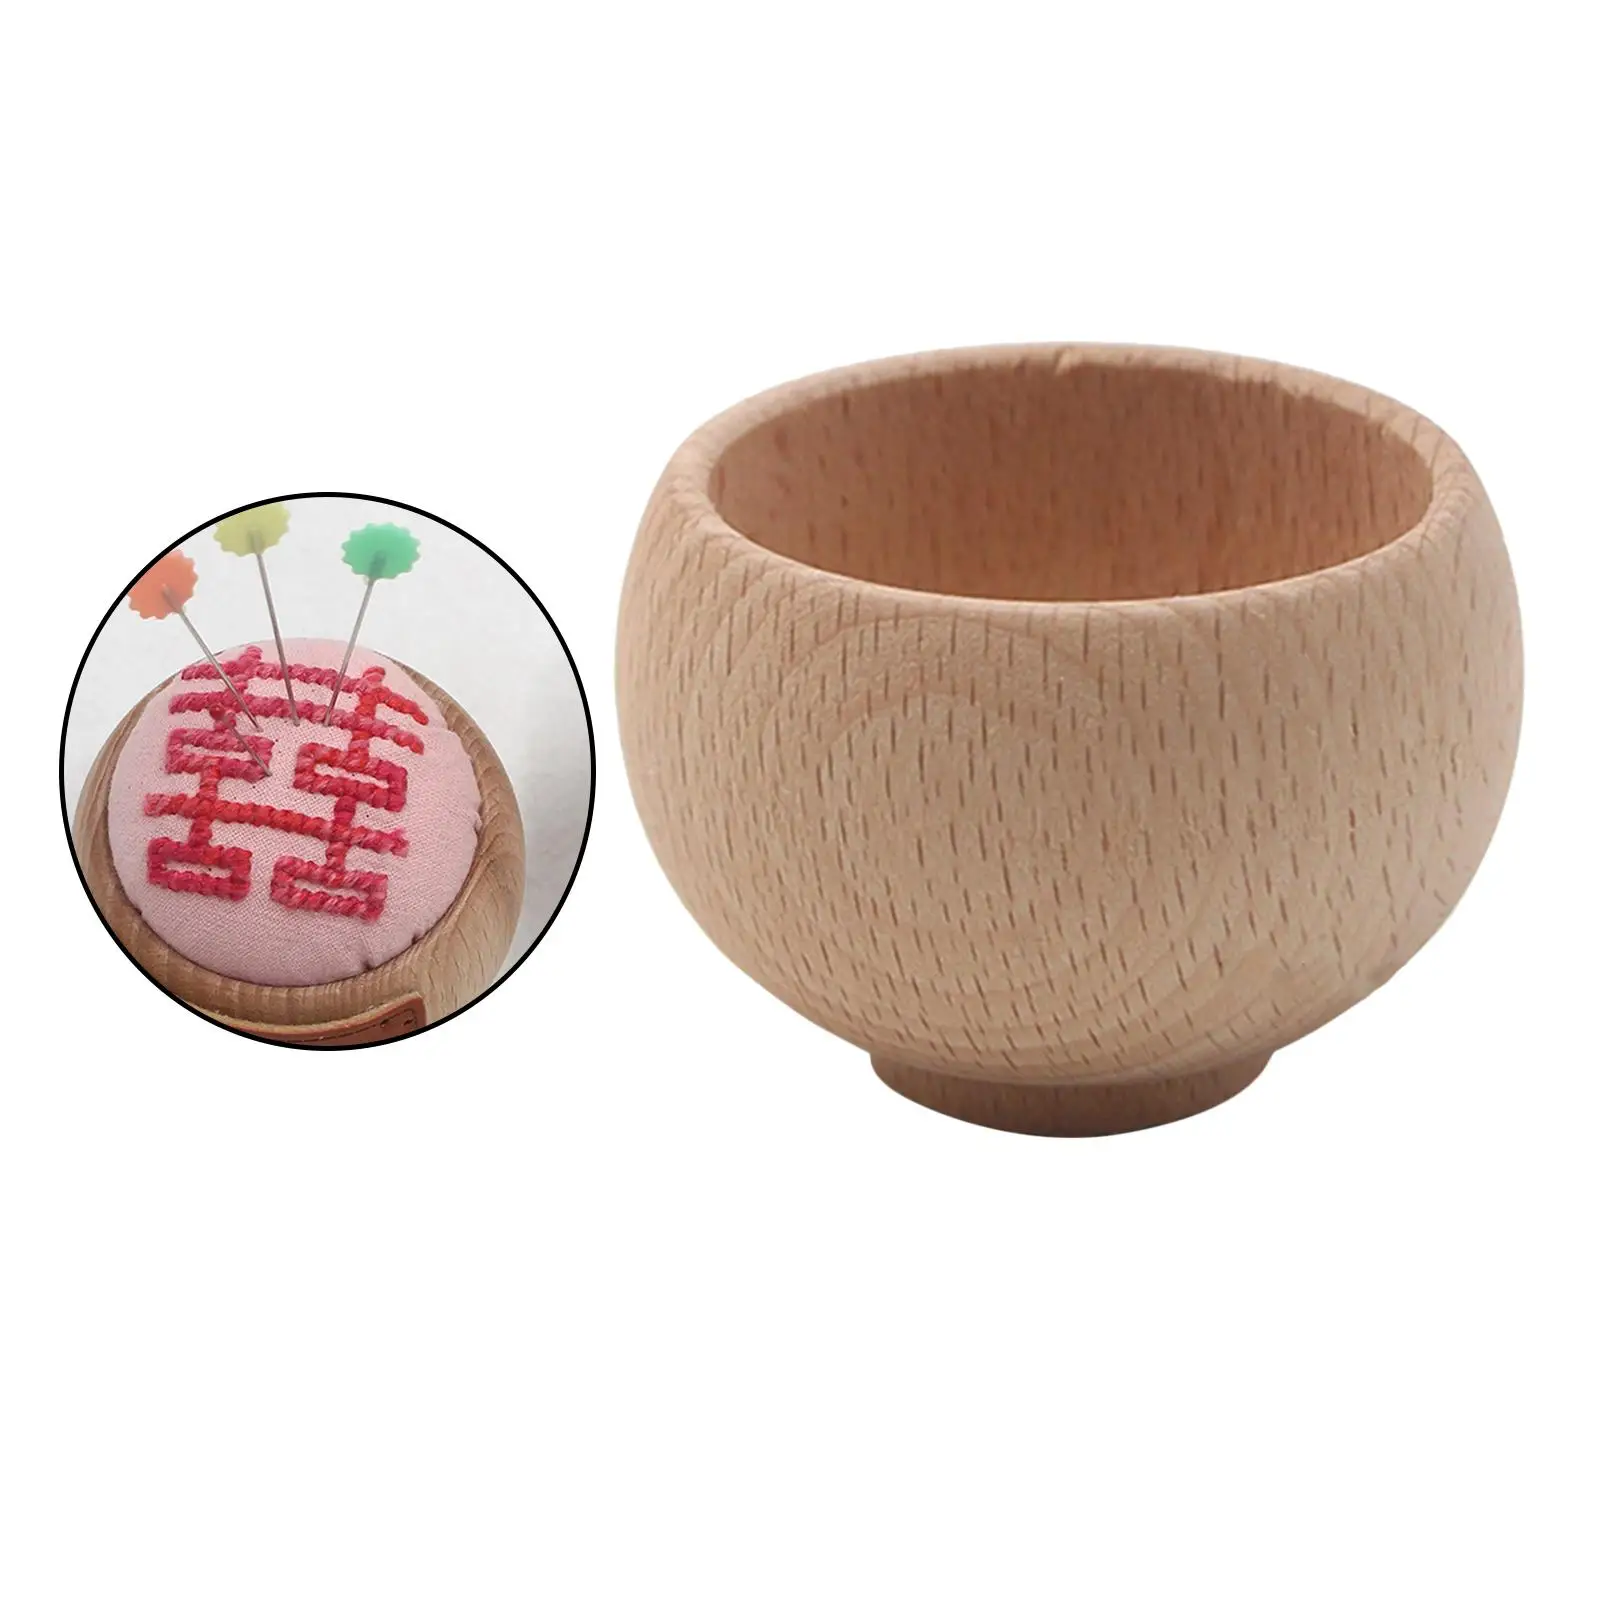 Sewing Holder DIY Holder Accessory Wooden Bowl Pin Pillow Handcraft